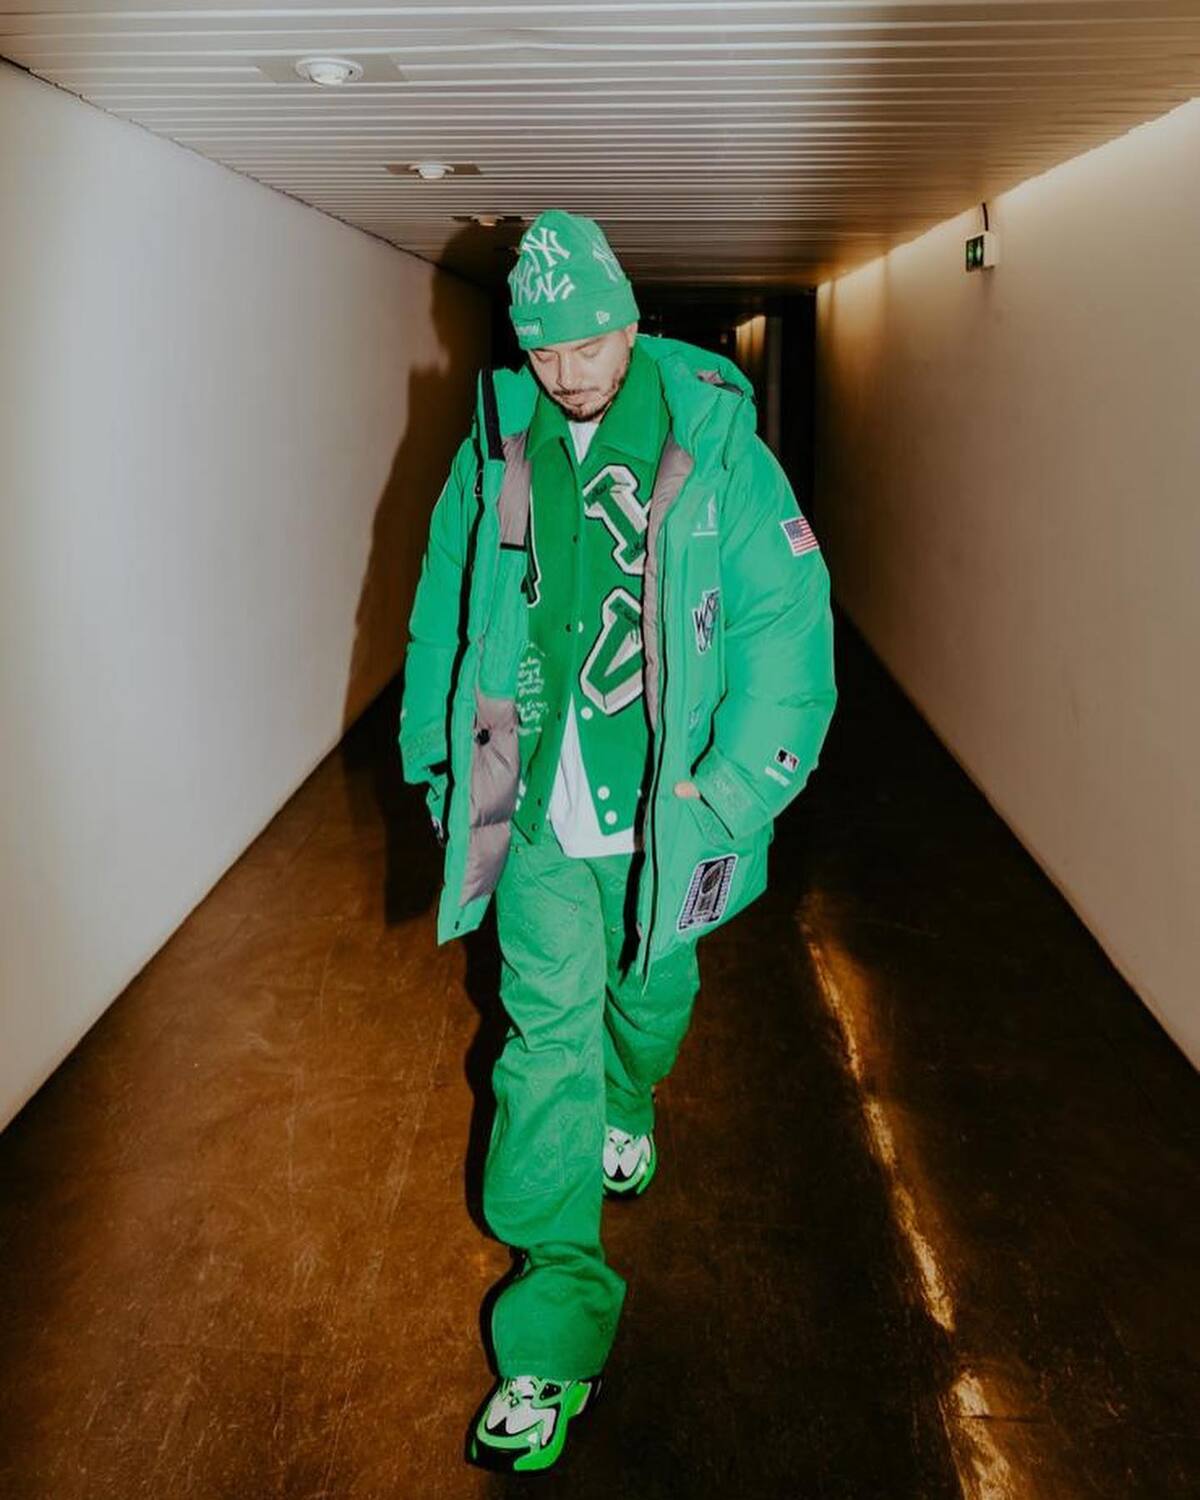 J Balvin Goes Green in Polo and Sunglasses at the U.S. Open – WWD